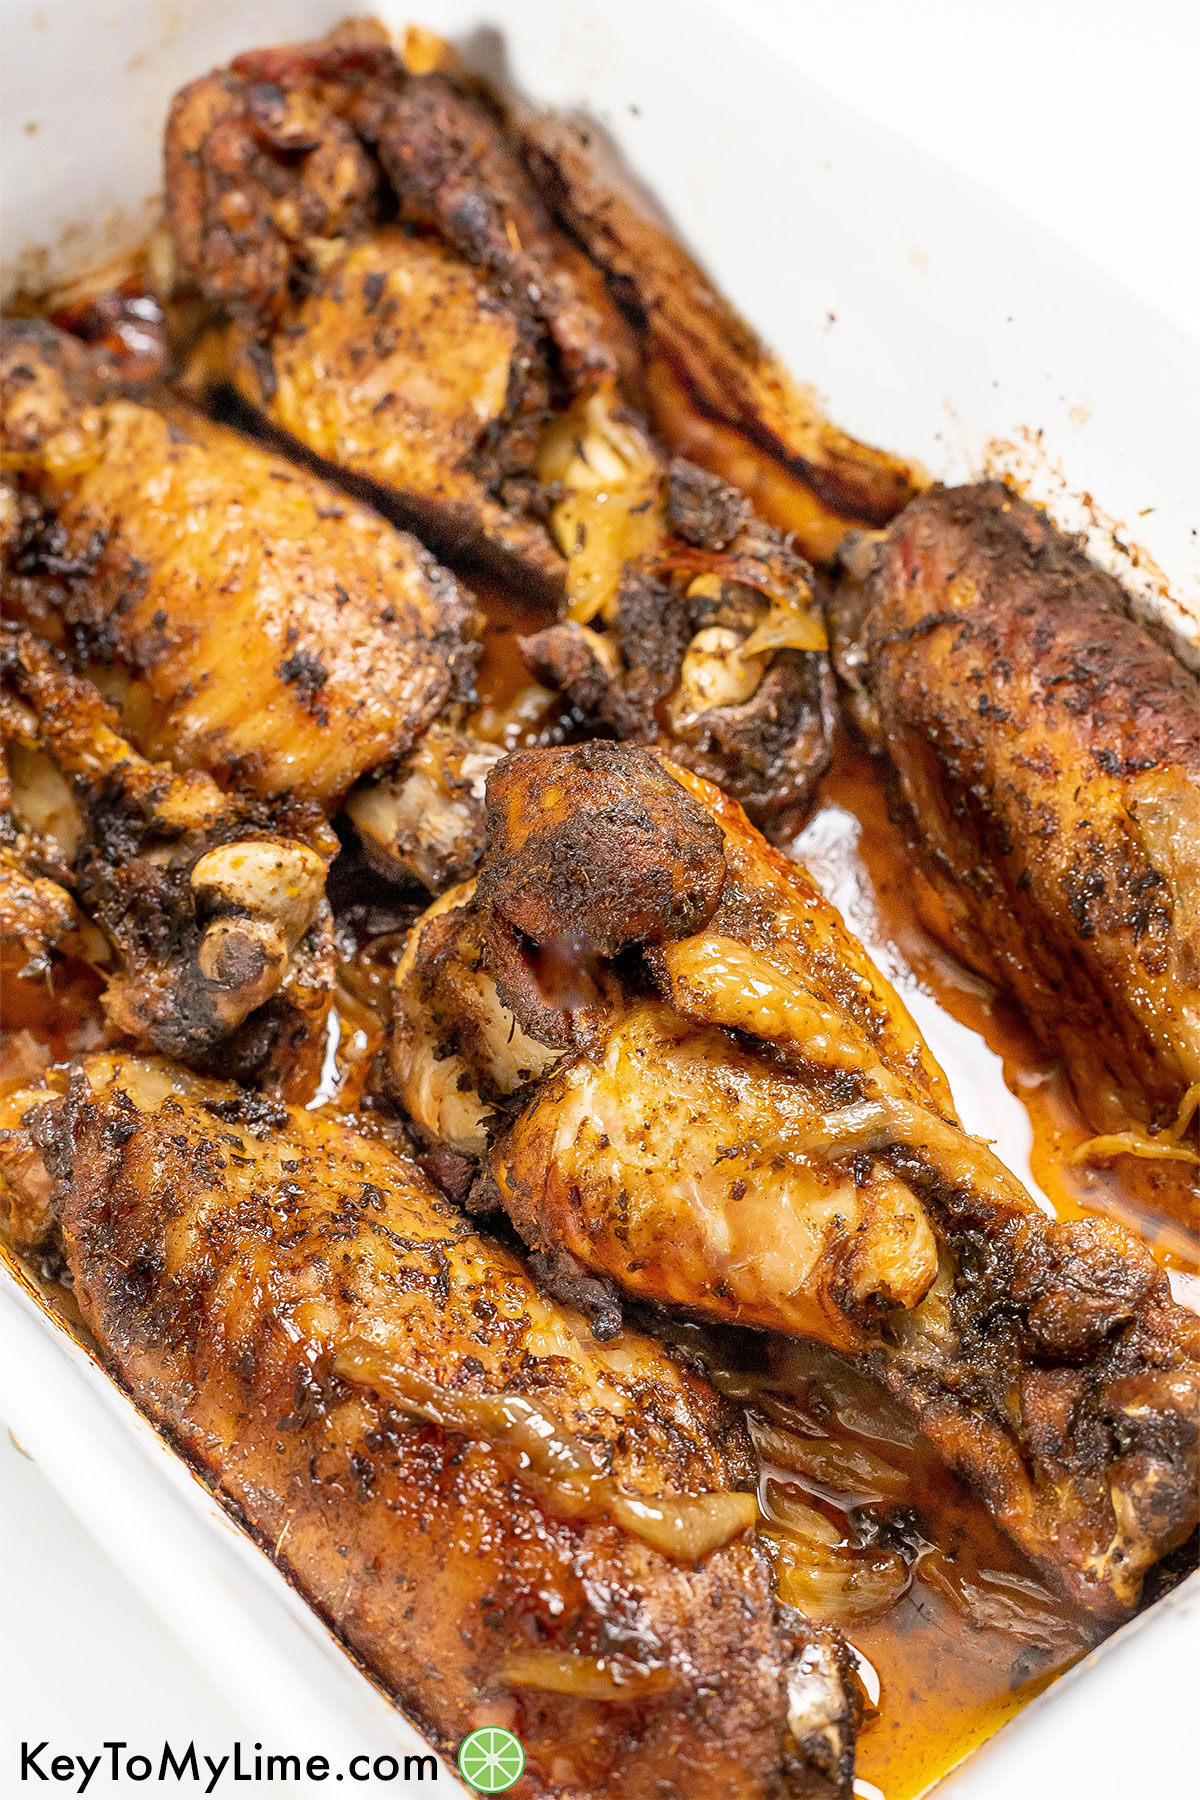 A side image of the baked turkey wings basted with juices and onions throughout.